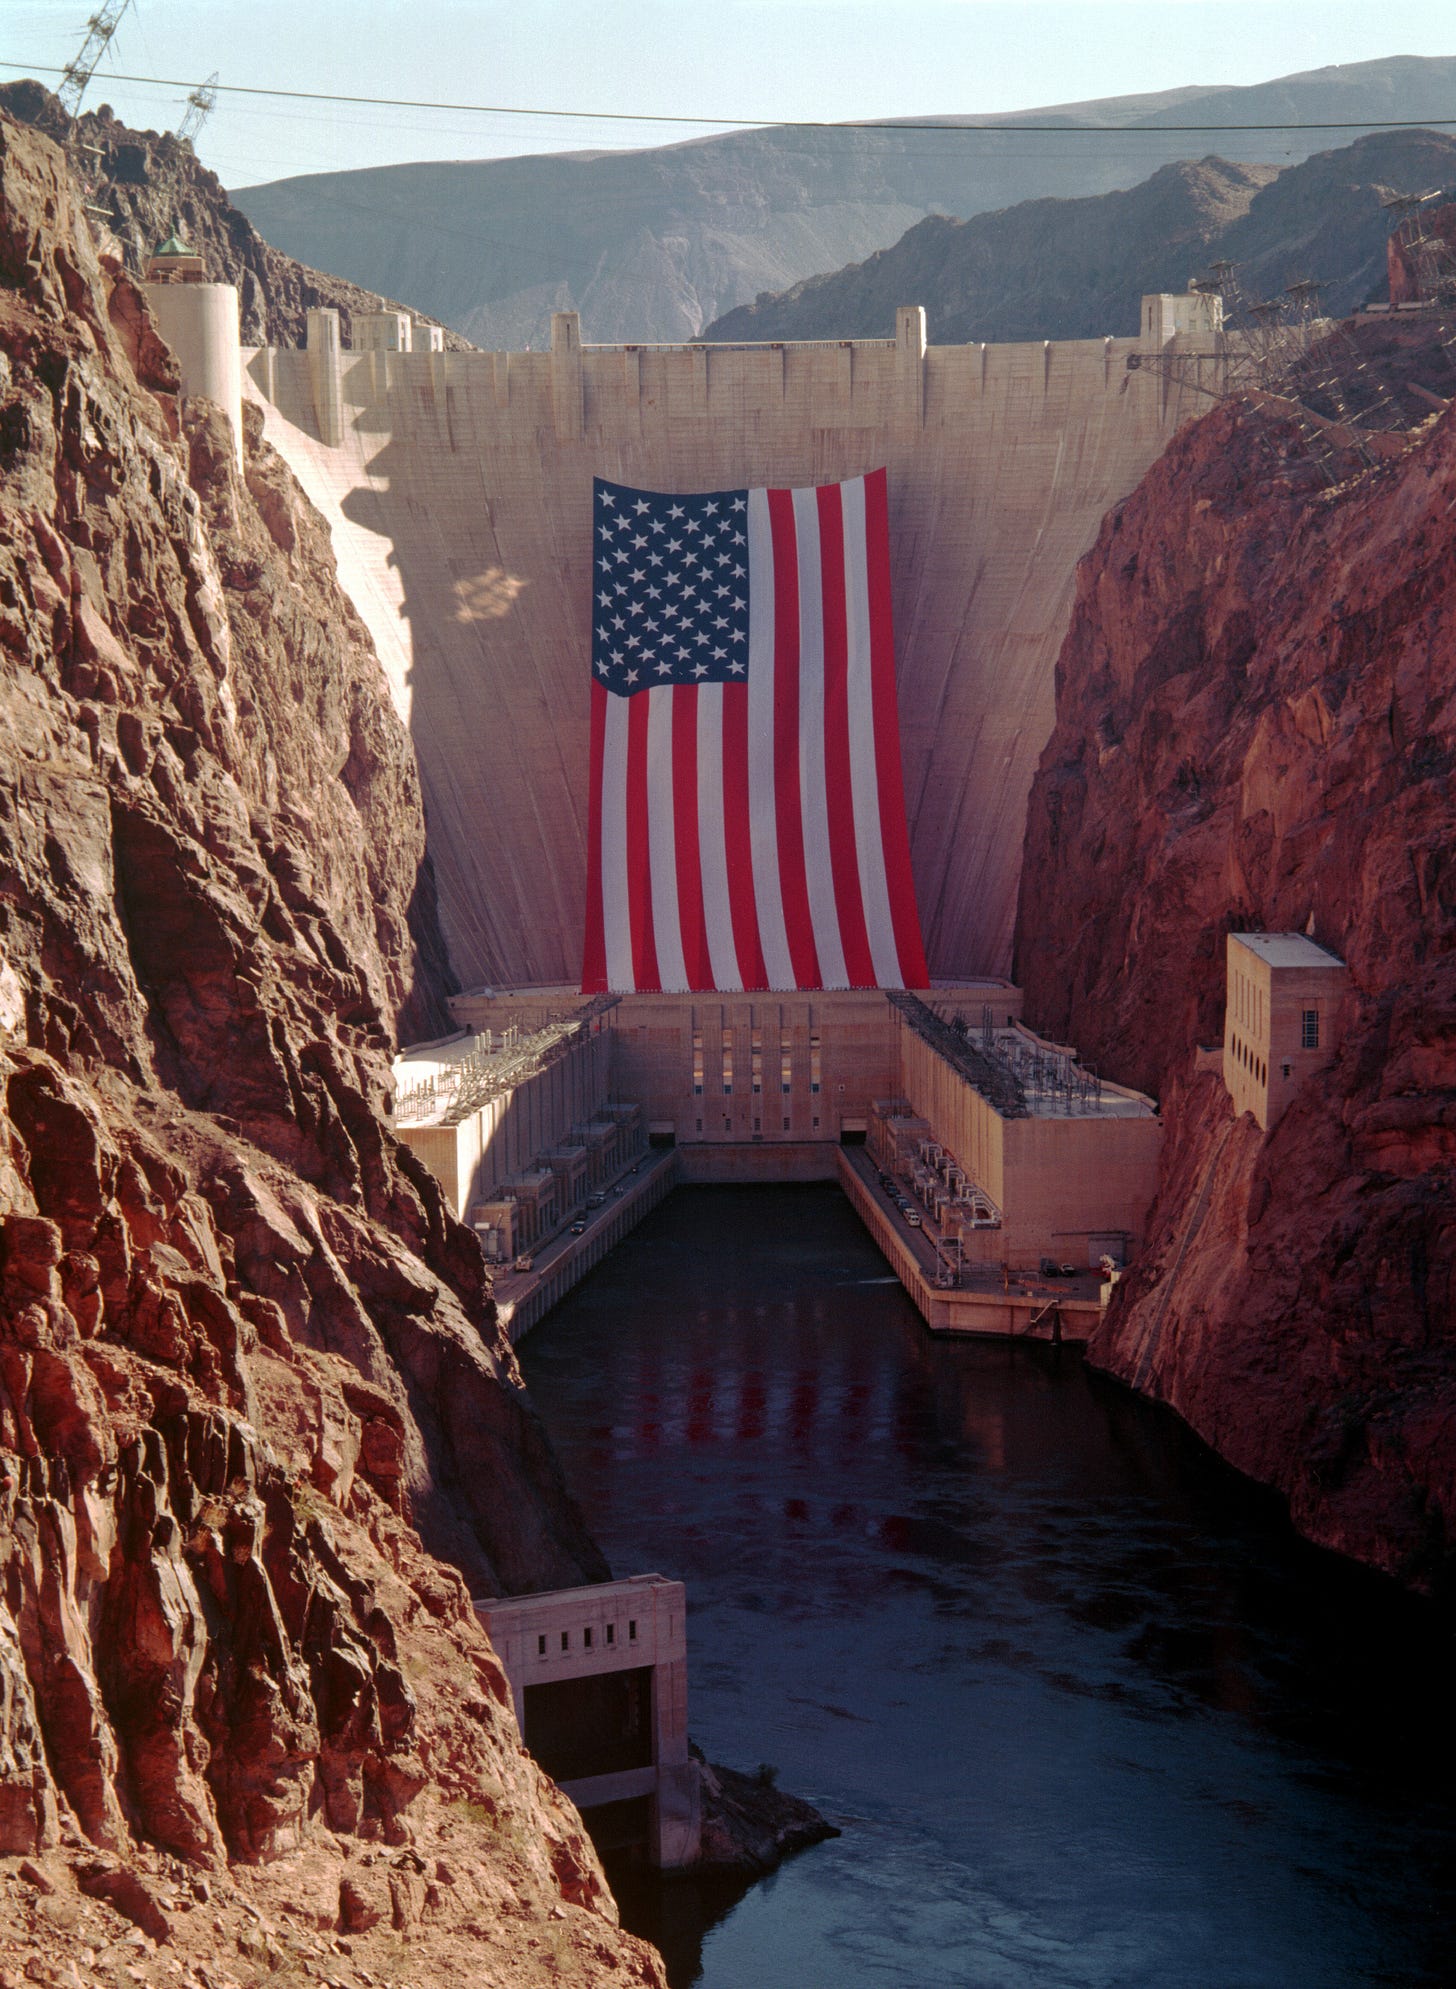 Photo of the Hoover Dam with a massive American flag attached to its downstream face. The flag was hoisted onto the dam for the 1996 Summer Olympics: The torch traveled across on its way to Atlanta, Georgia,